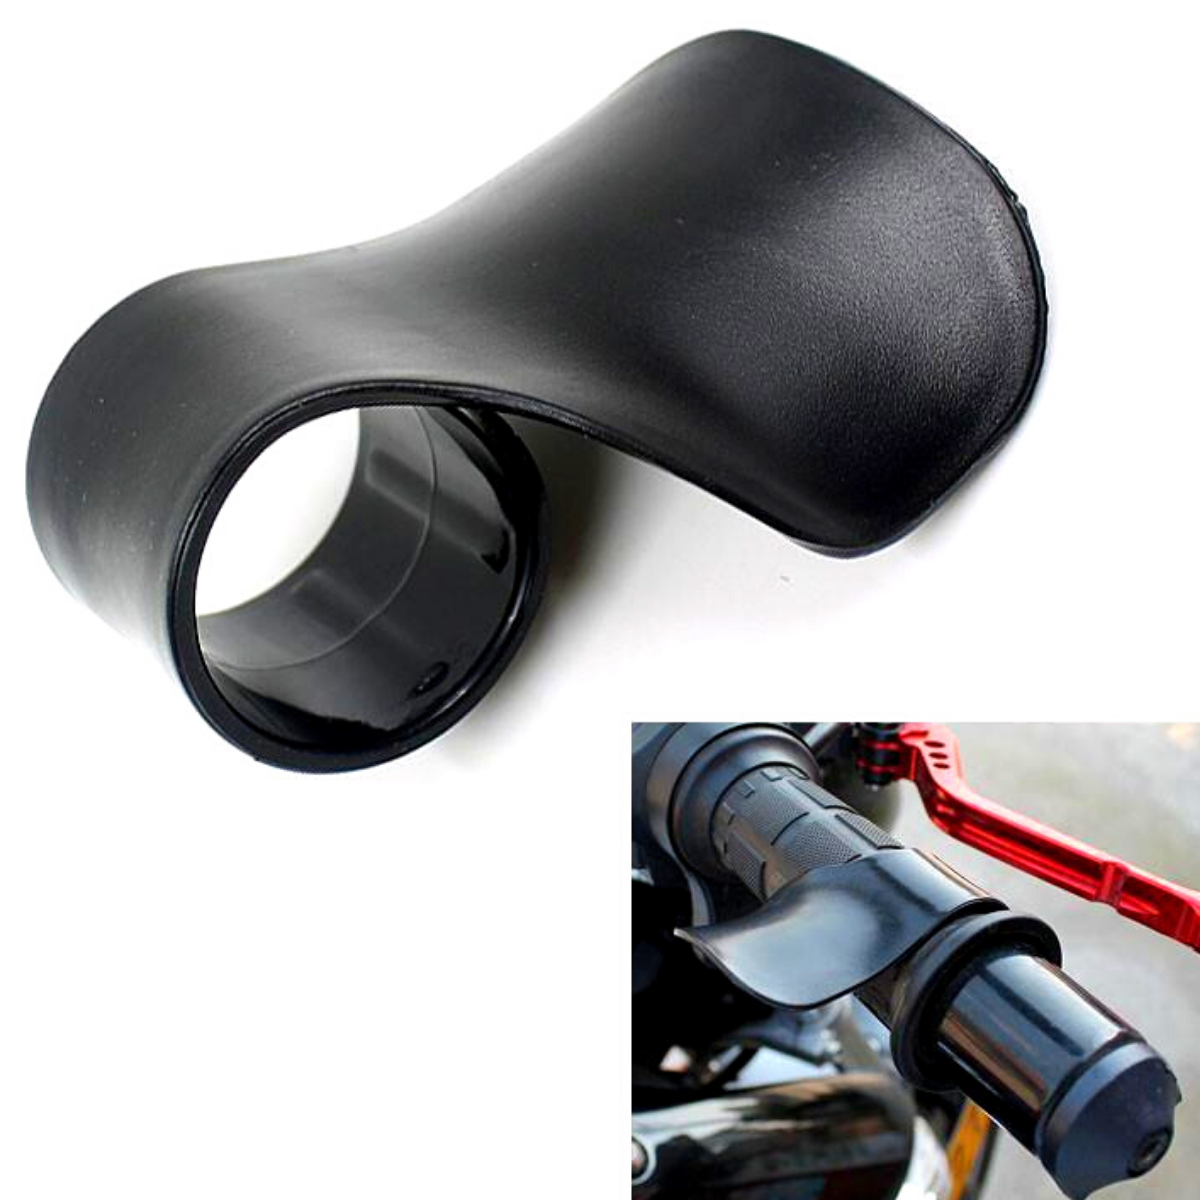 A comfortable black Universal Motorcycle Throttle Cruise Control with a red handlebar, perfect for long-distance rides. It features throttle cruise assist control for added convenience.